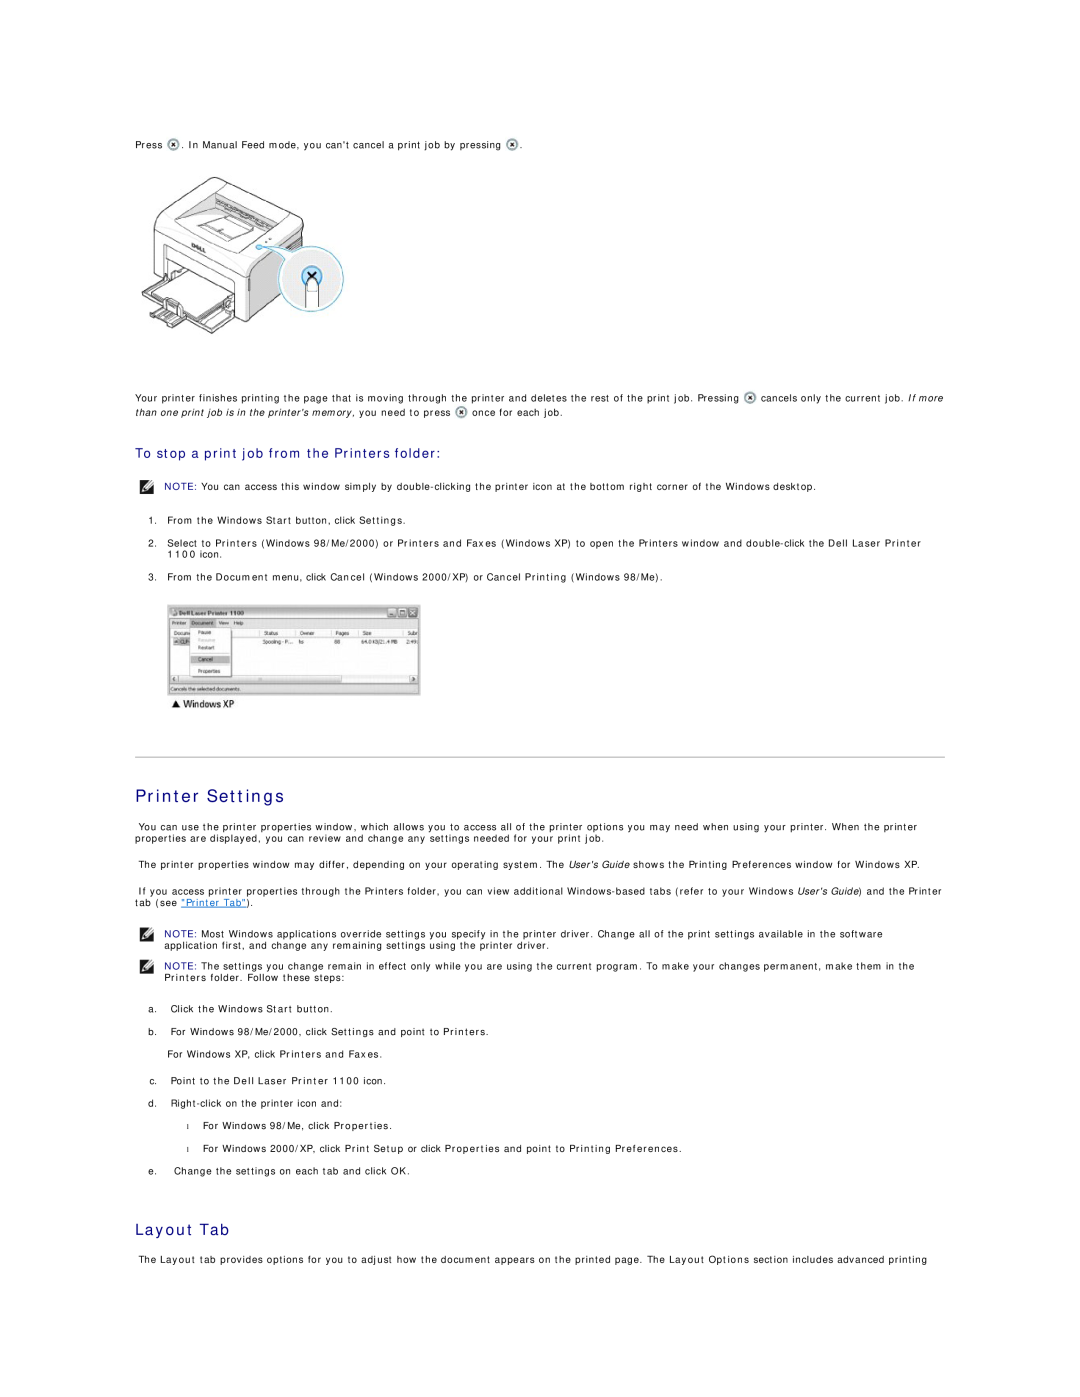 Dell 1100 specifications Printer Settings, Layout Tab, To stop a print job from the Printers folder 